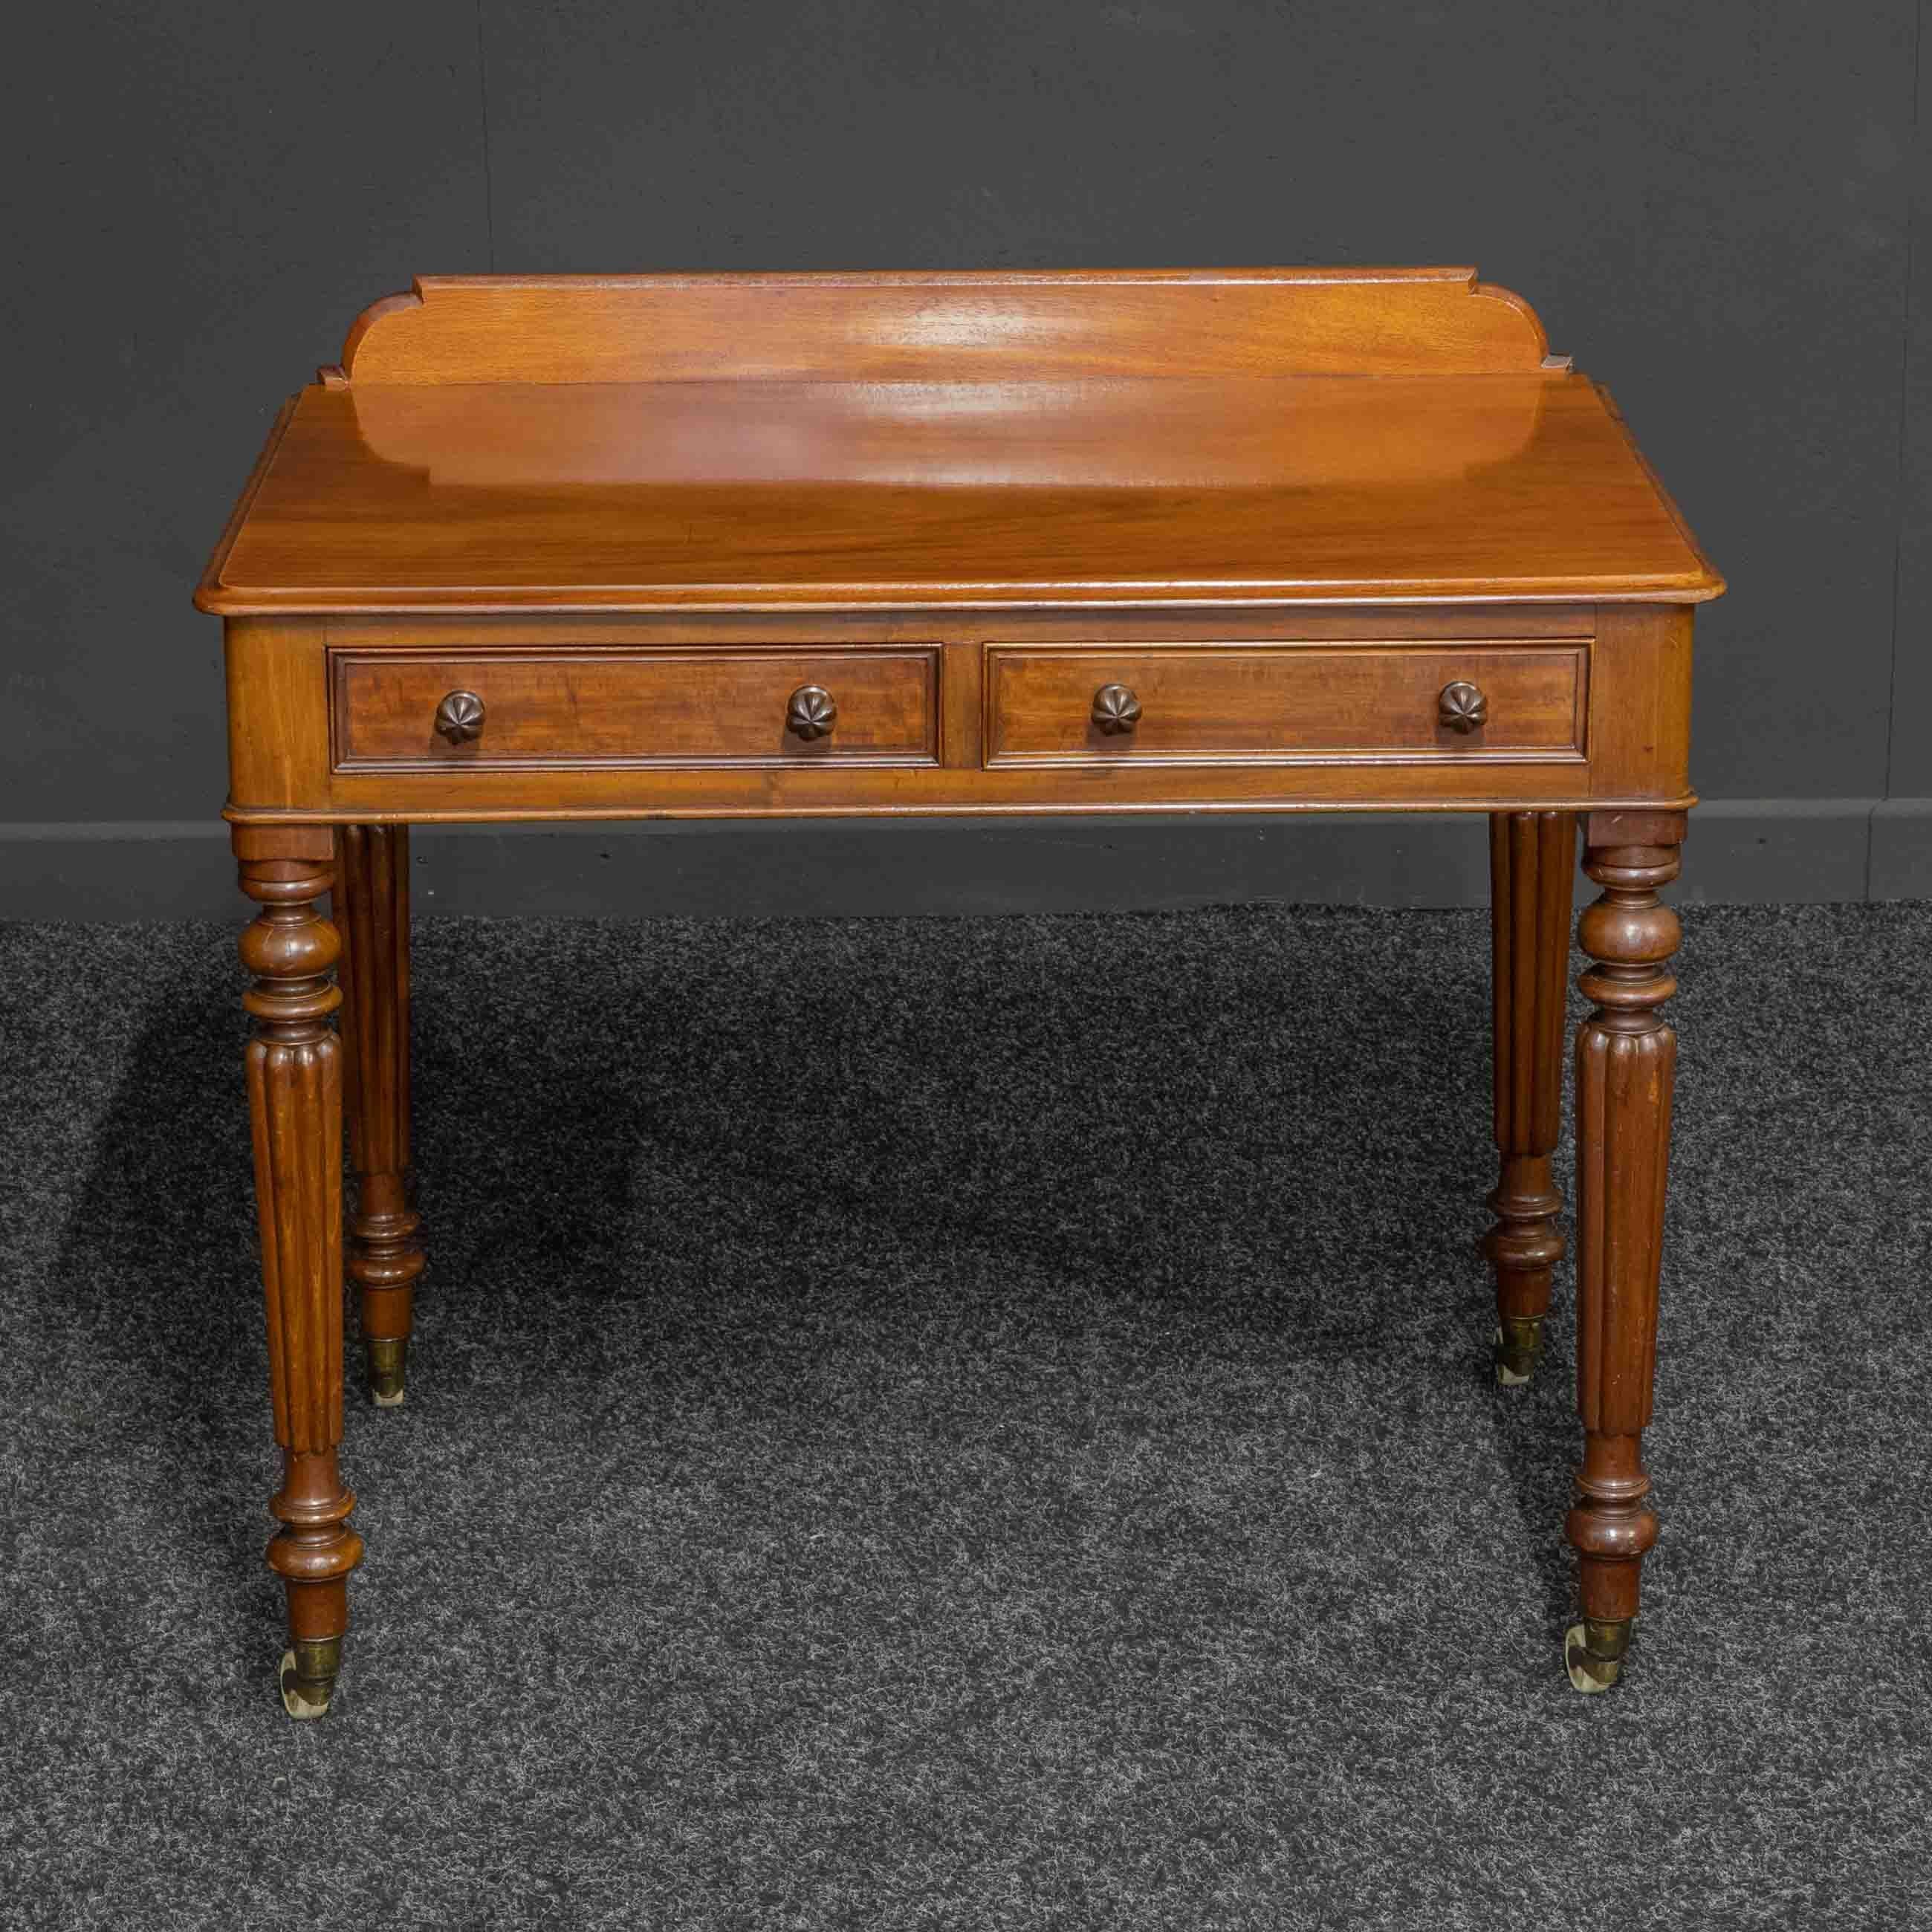 A superb late Regency/ William IV mahogany side table stamped to the top of the left hand drawer 'Maple - London'. With typical turned and fluted legs which still retain their original castors. A pair of drawers with superb knobs that also have